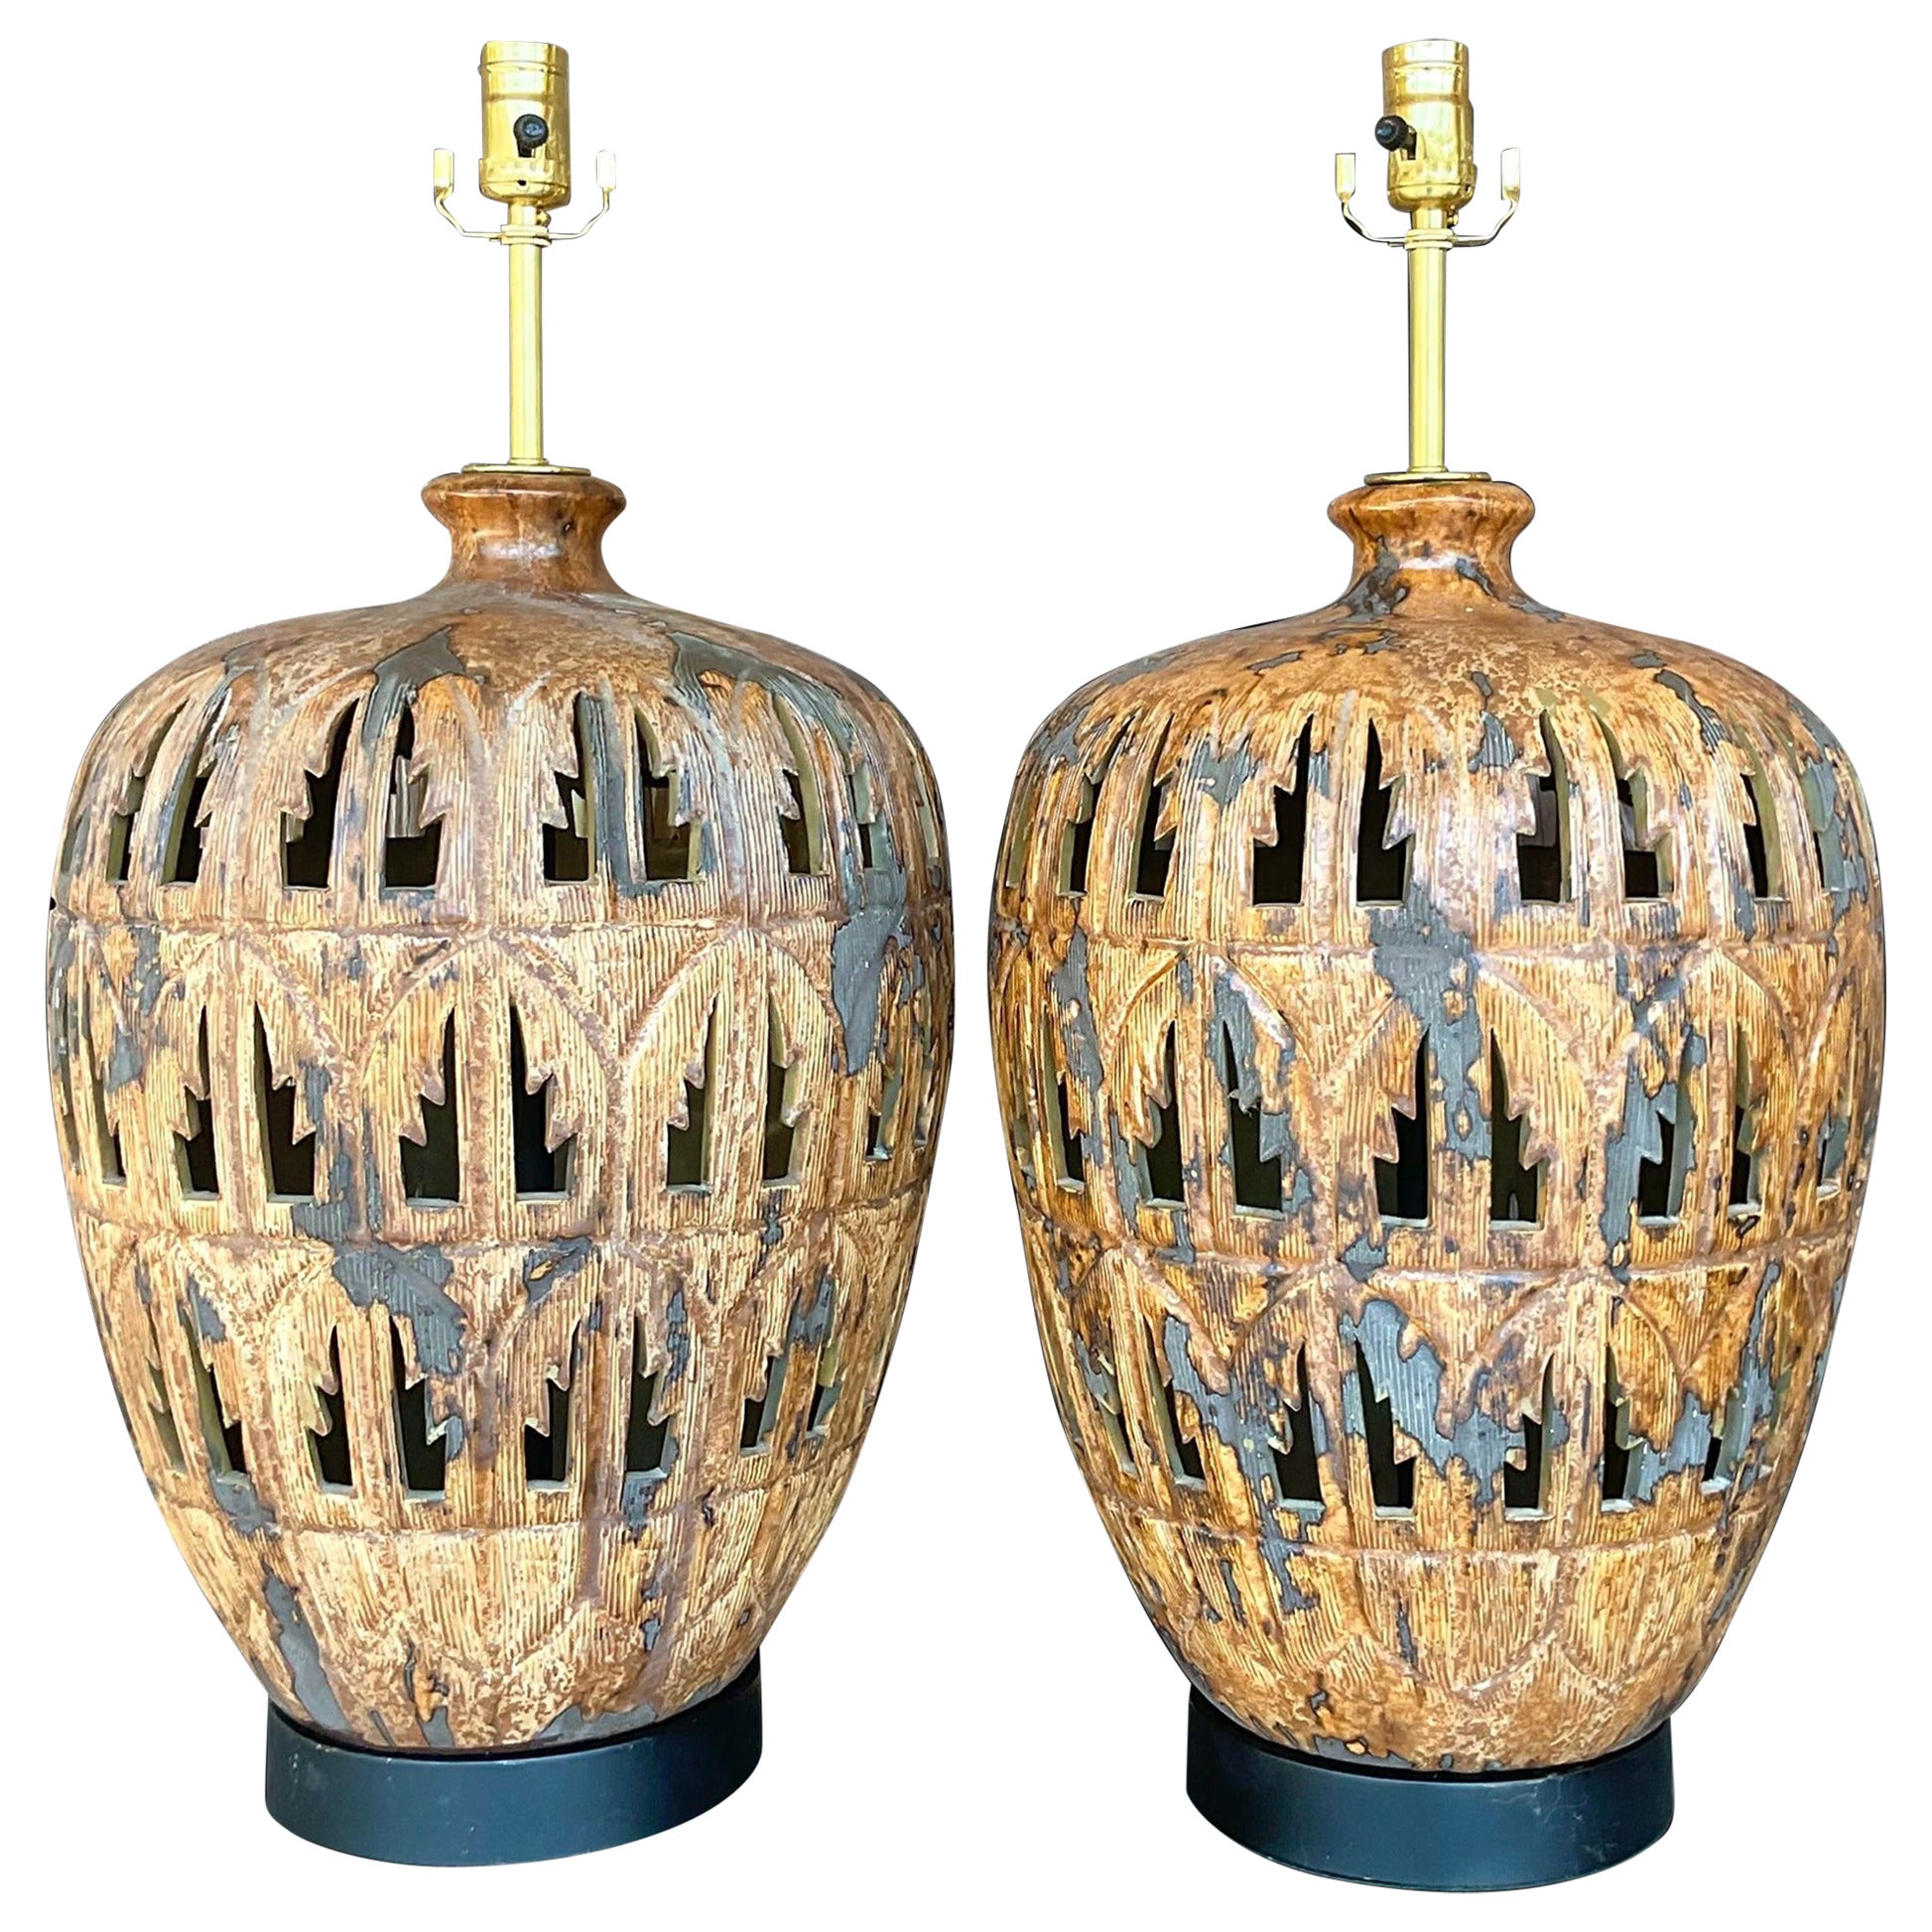 Vintage Boho Punch Cut Palm Frond Ceramic Table Lamps - a Pair For Sale